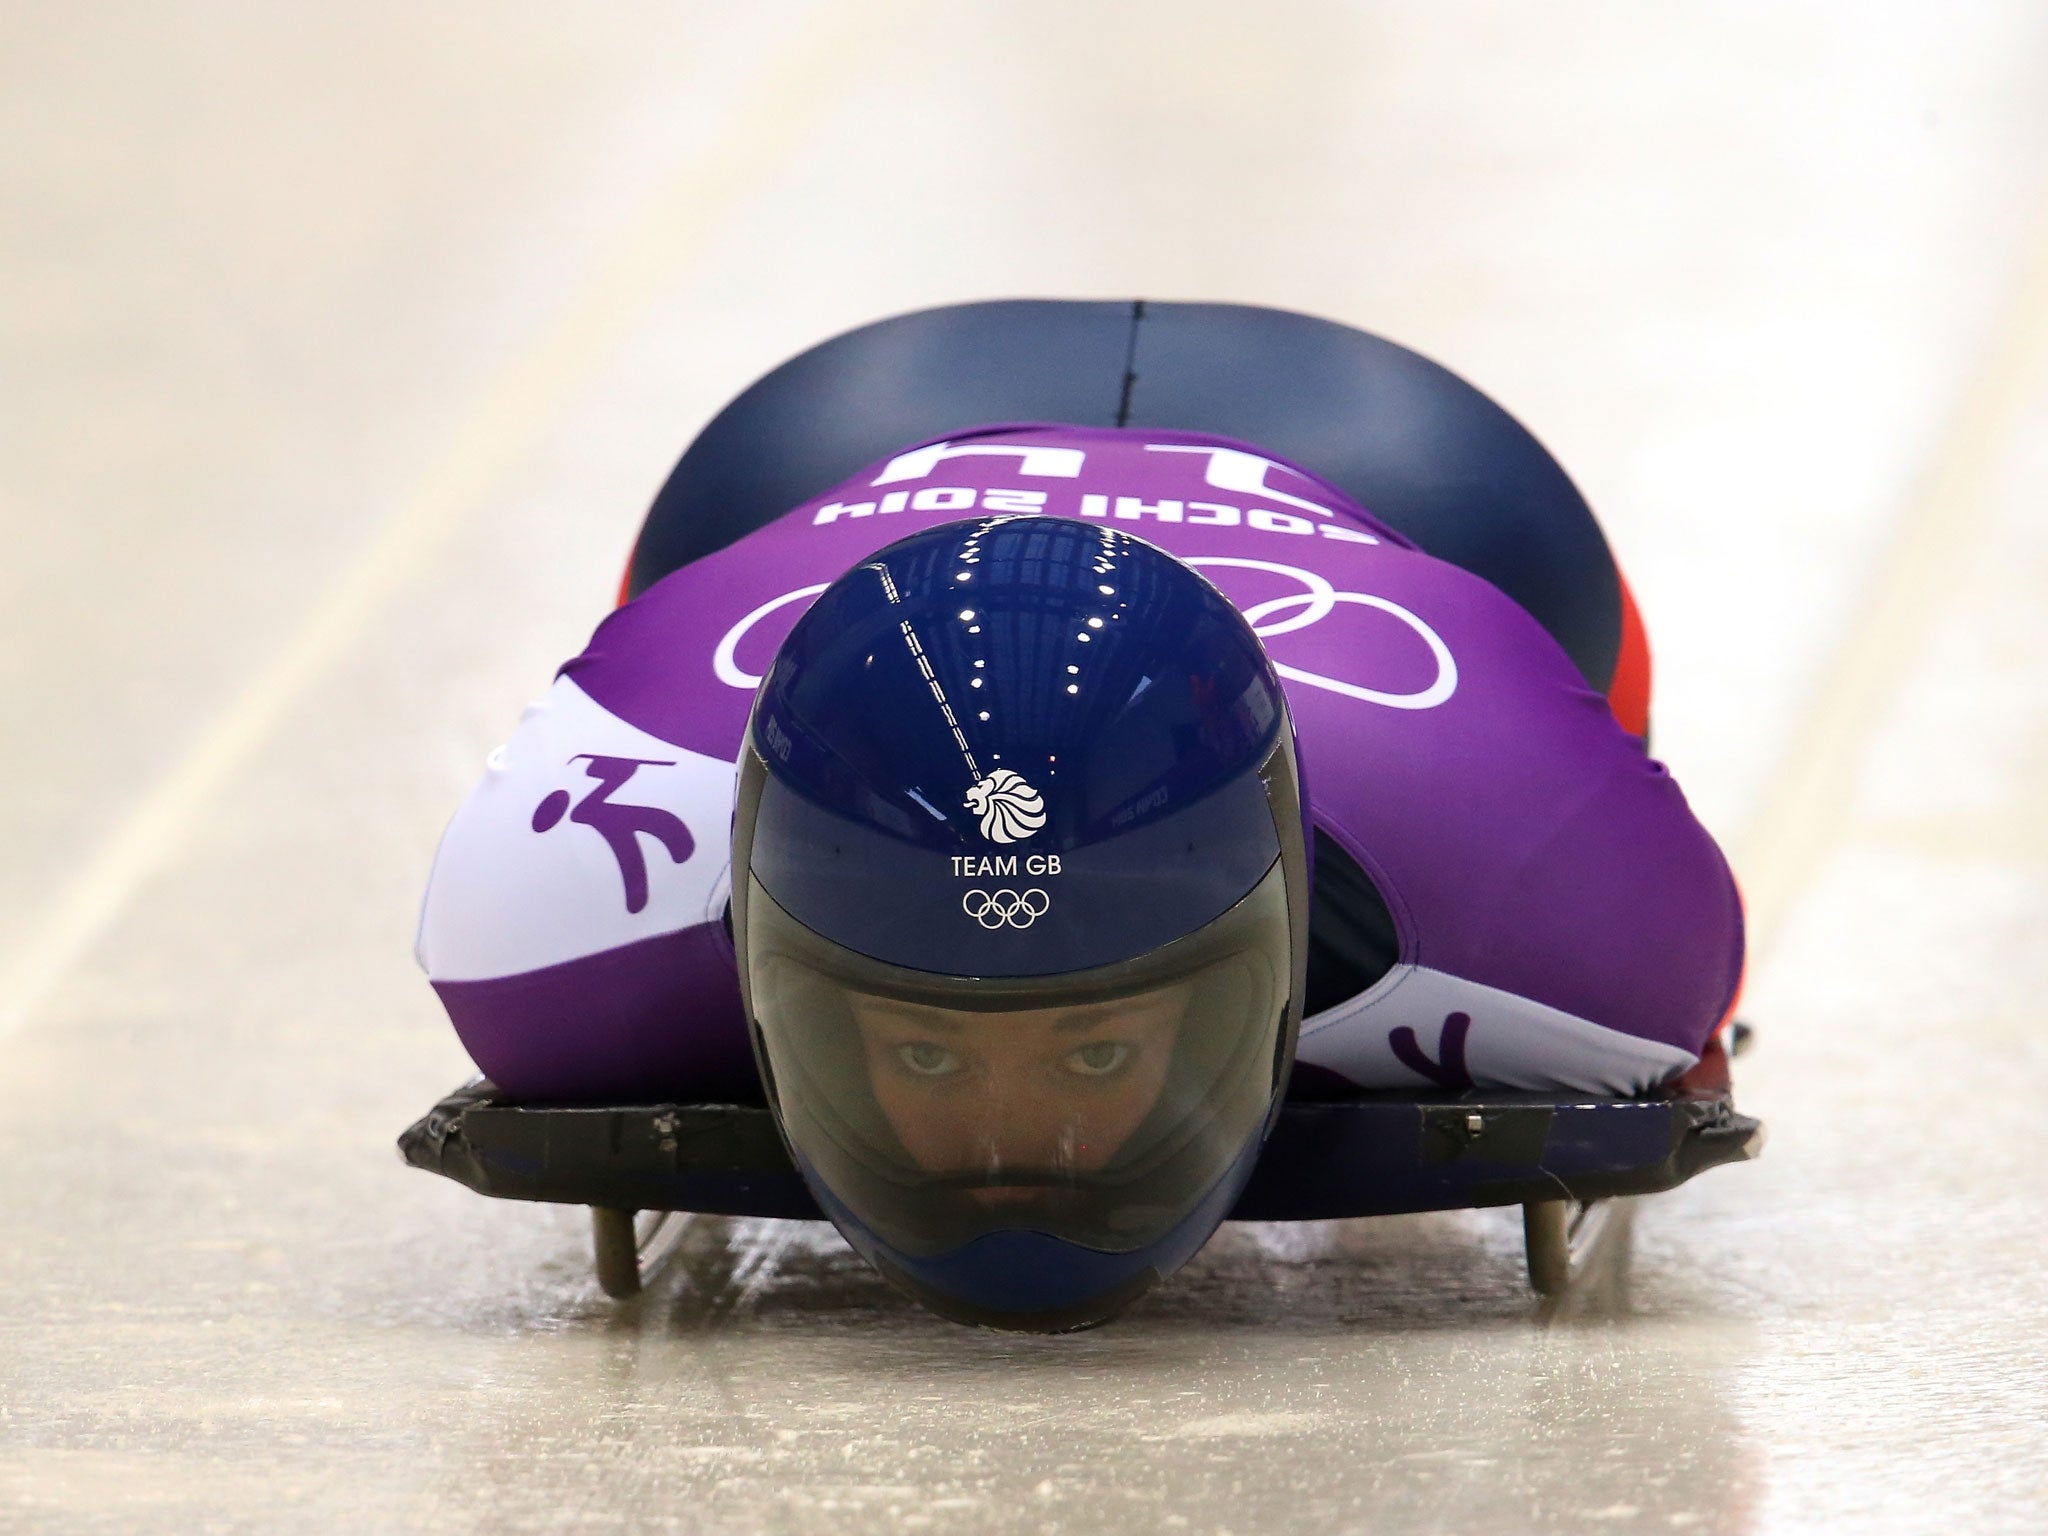 Lizzy Yarnold topped the timesheets on the opening day of training in the skeleton competition in Sochi